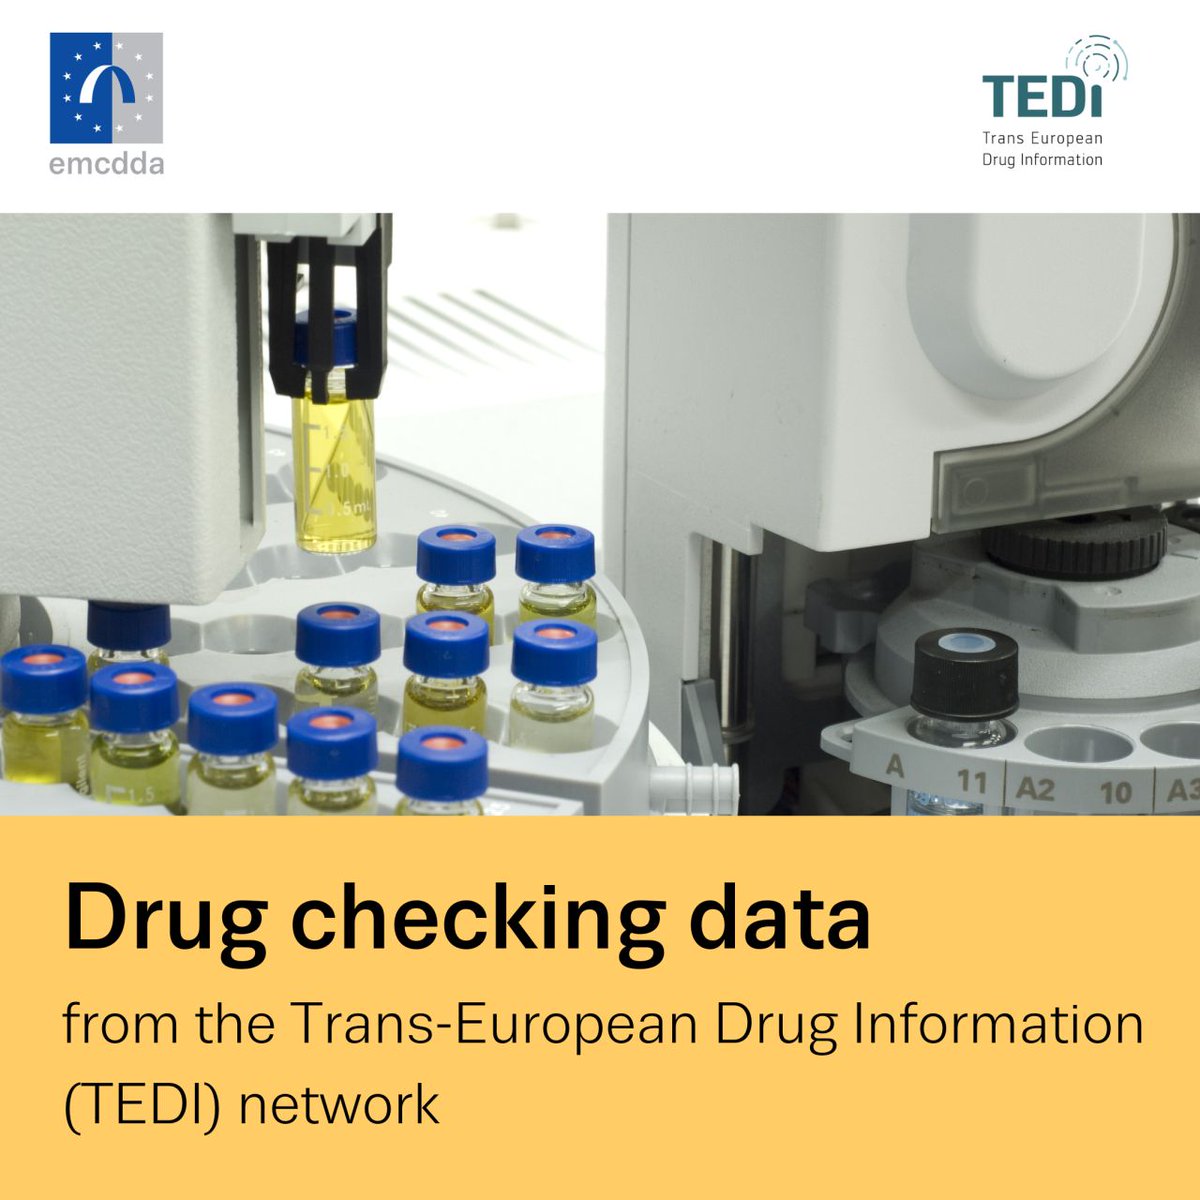 Explore the latest data, presented in interactive maps, from the Trans-European Drug Information (TEDI) #drugchecking network:
emcdda.europa.eu/publications/d…